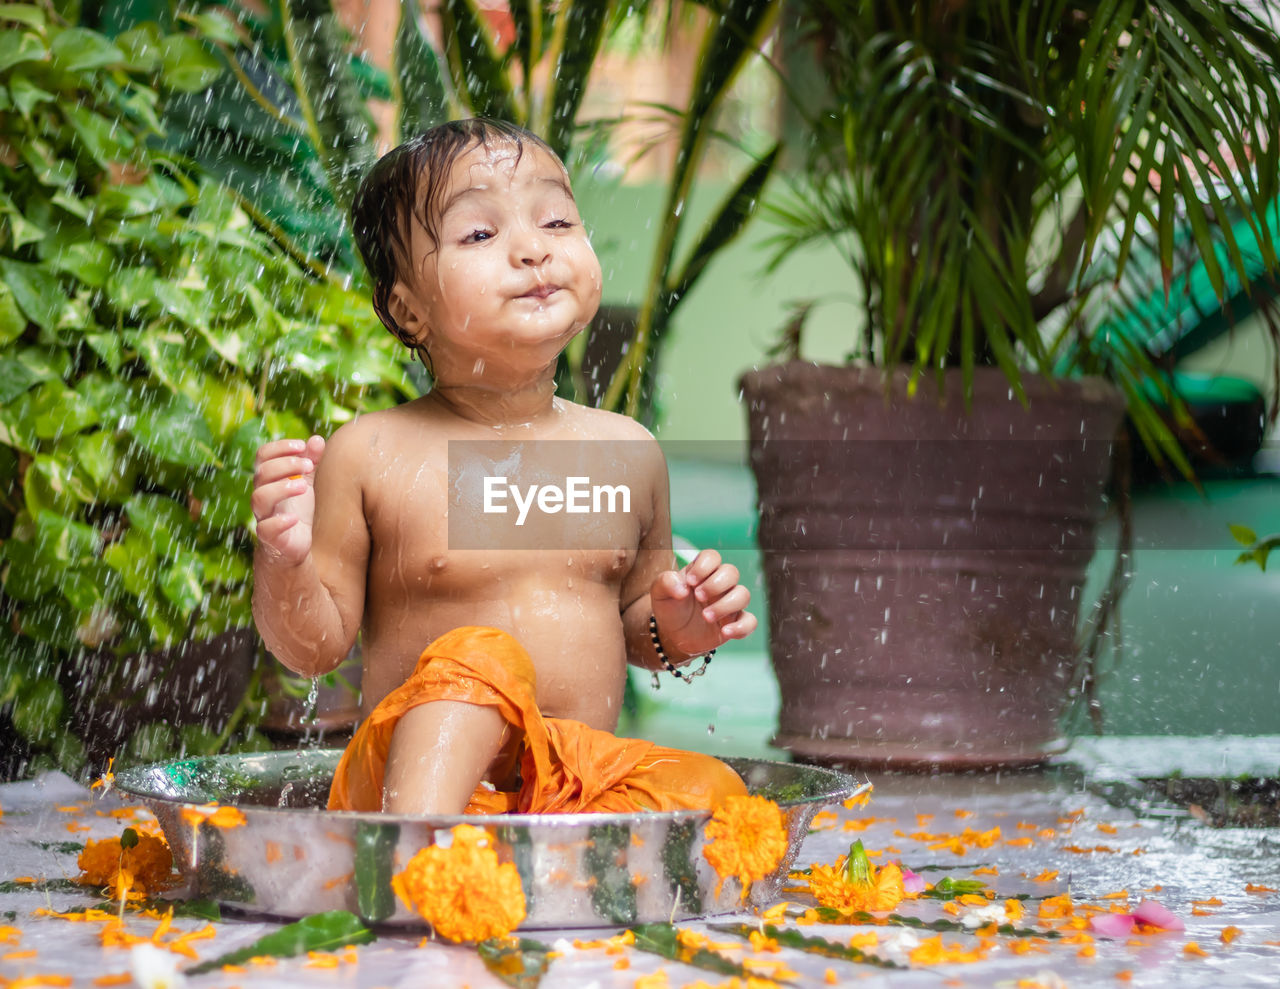 water, child, childhood, one person, nature, wet, men, happiness, fun, smiling, baby, swimming, emotion, tropical climate, lifestyles, enjoyment, plant, taking a bath, toddler, outdoors, flower, food and drink, holiday, leisure activity, front or back yard, bathtub, day, summer, portrait, domestic bathroom, splashing, cheerful, vacation, trip, motion, refreshment, cleaning, front view, bathing, person